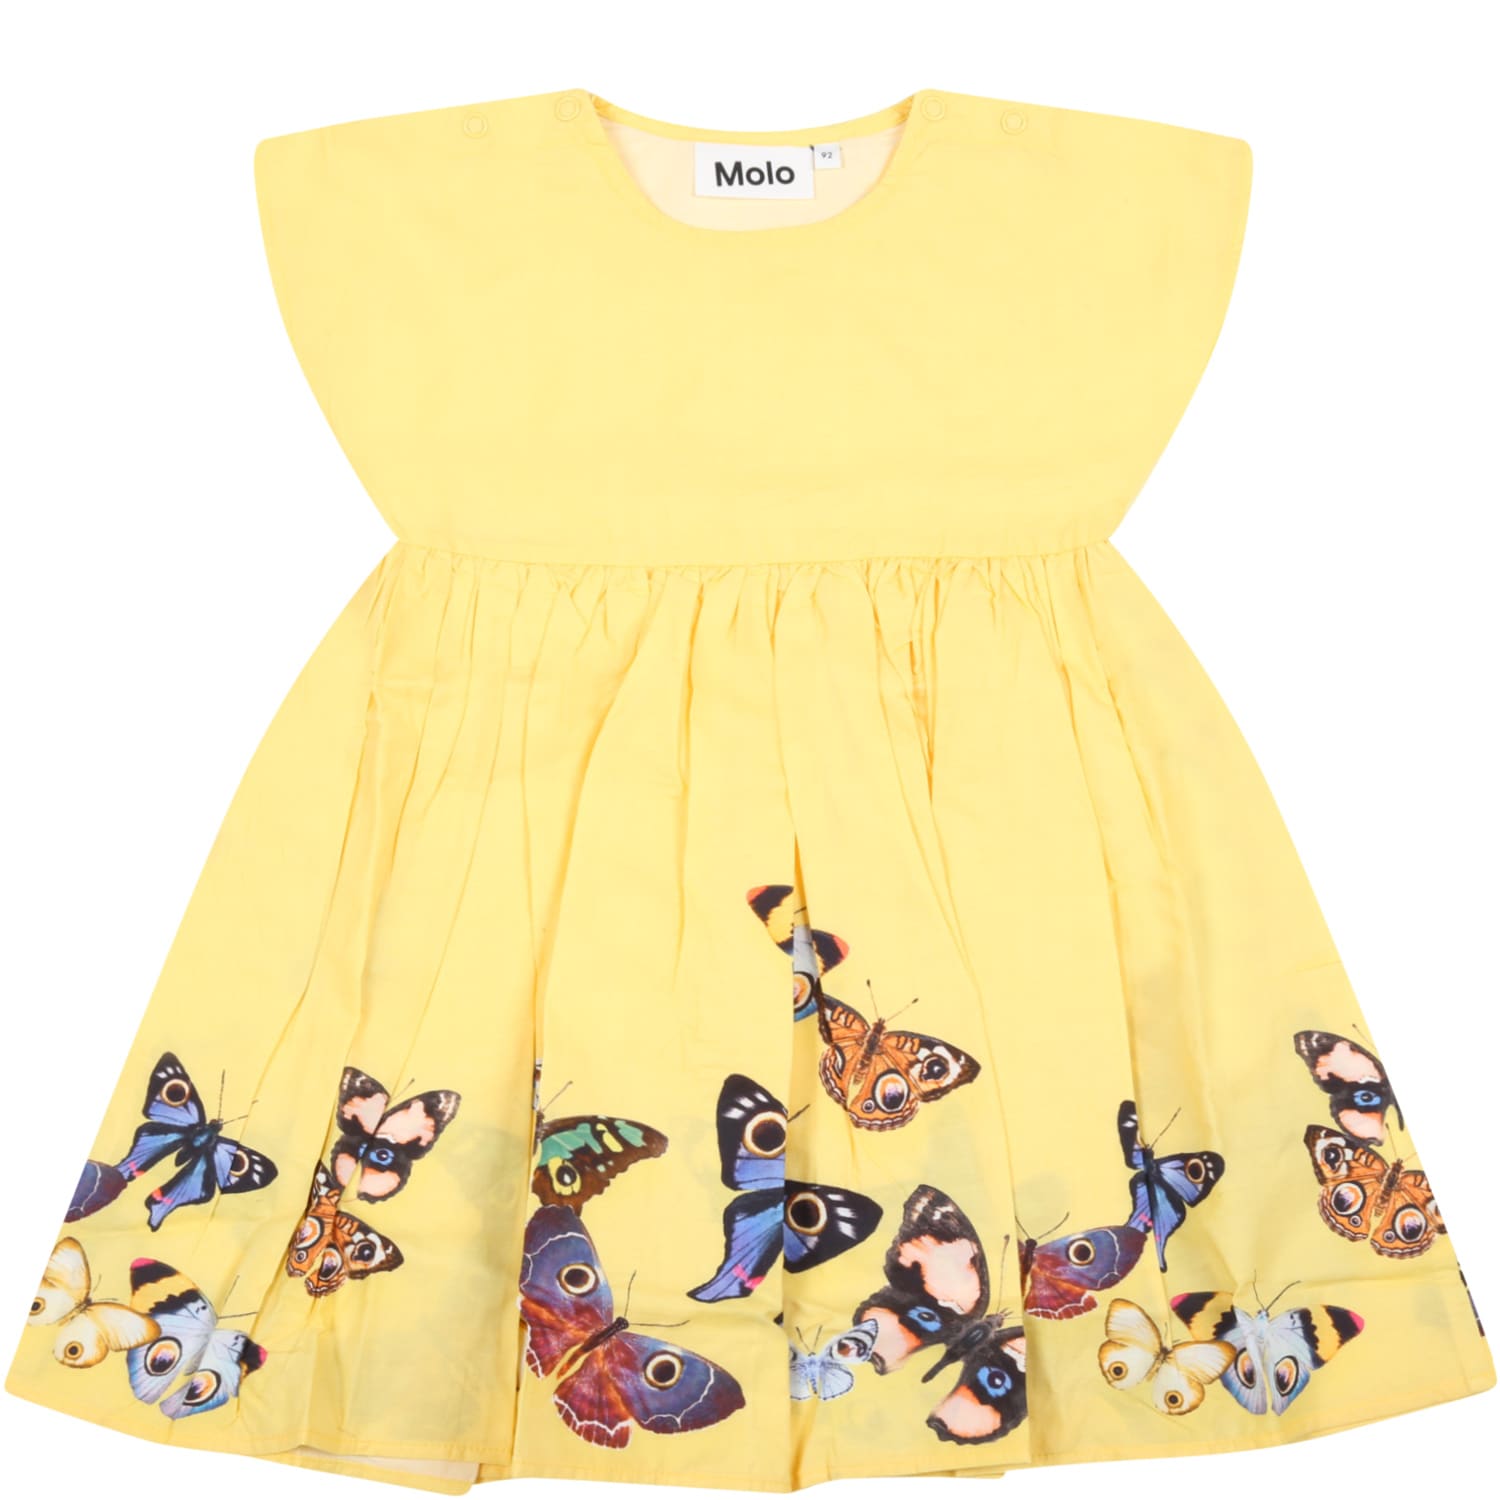 Molo Yellow Dress For Baby Girl With Butterflies